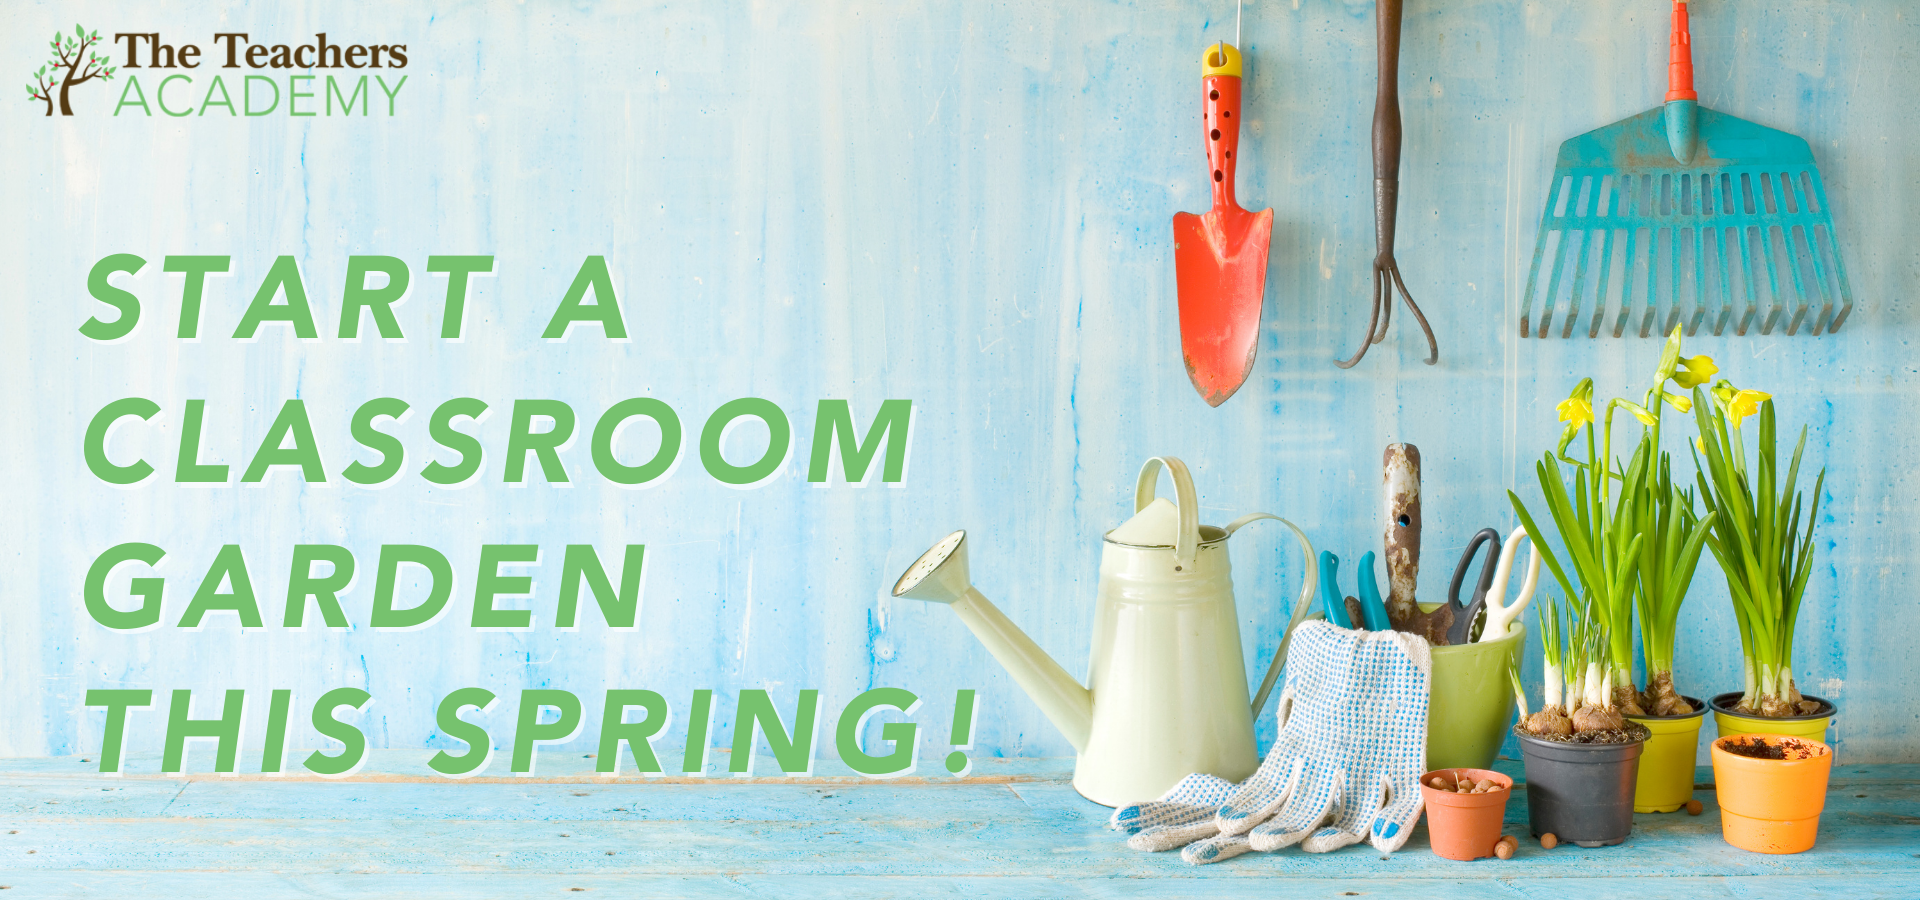 gardening tools and plants used to create a classroom garden